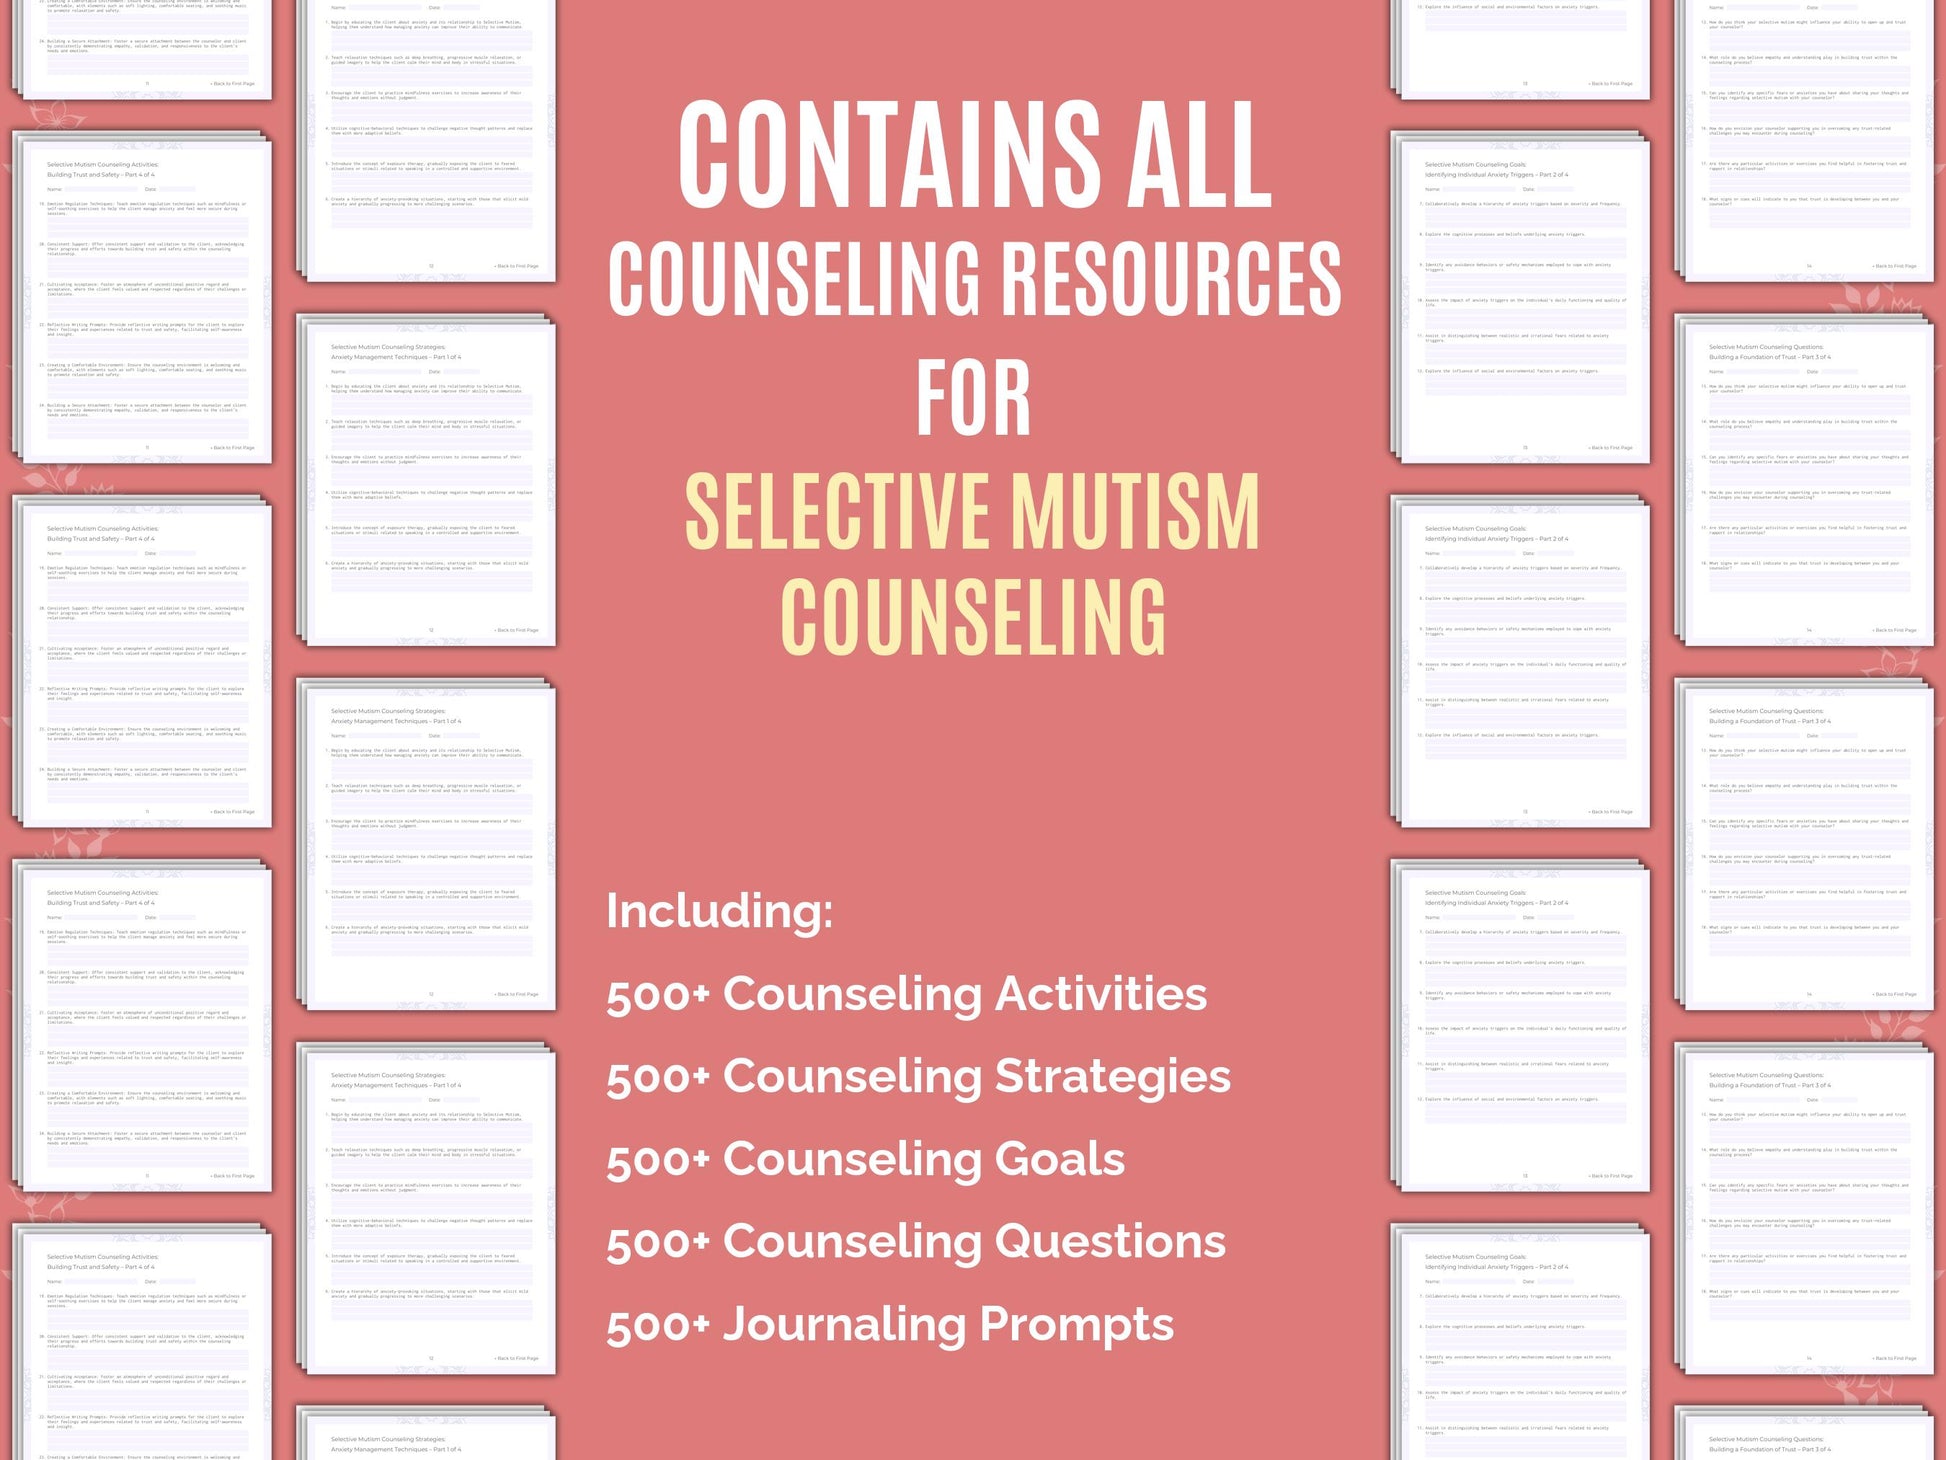 Mutism, Selective Therapy, Selective Idea, Selective Counseling, Mental Health, Selective Bundle, Counselor, Therapist, Selective Resource, Selective Template, Selective Tool, Selective Workbook, Selective Worksheet